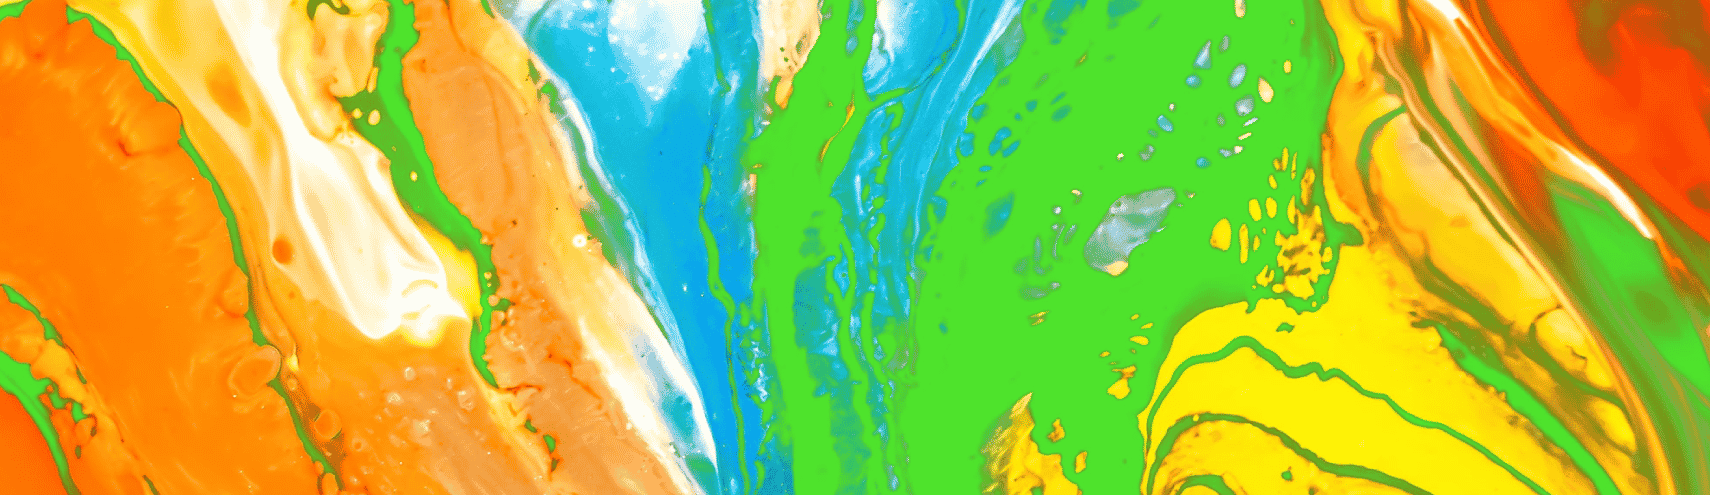 Splashes of green, blue, and red colors mixed together